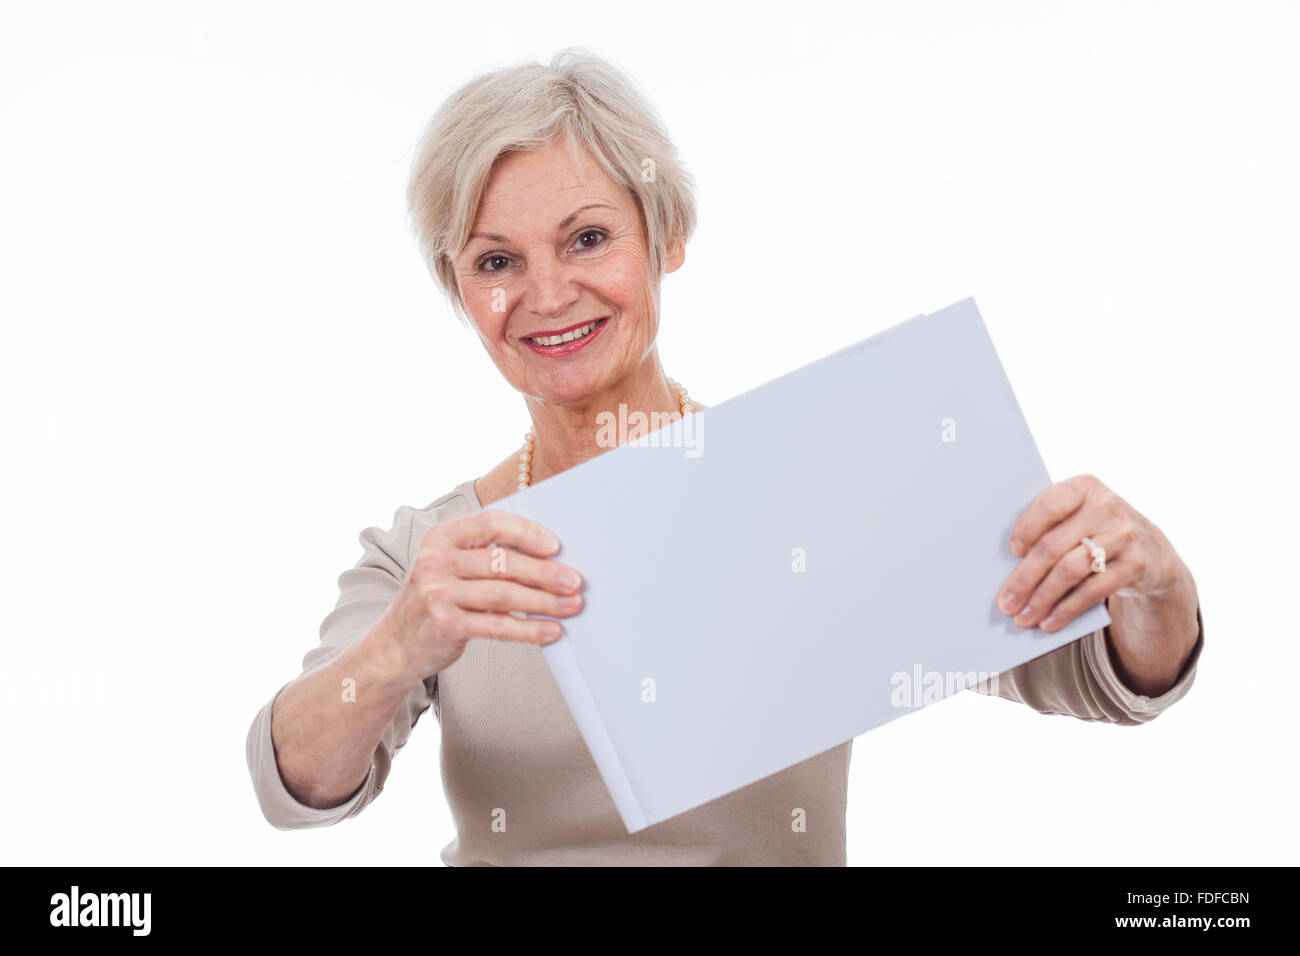 beautiful happy smiling older senior women holding sign with text space for advertising Stock Photo